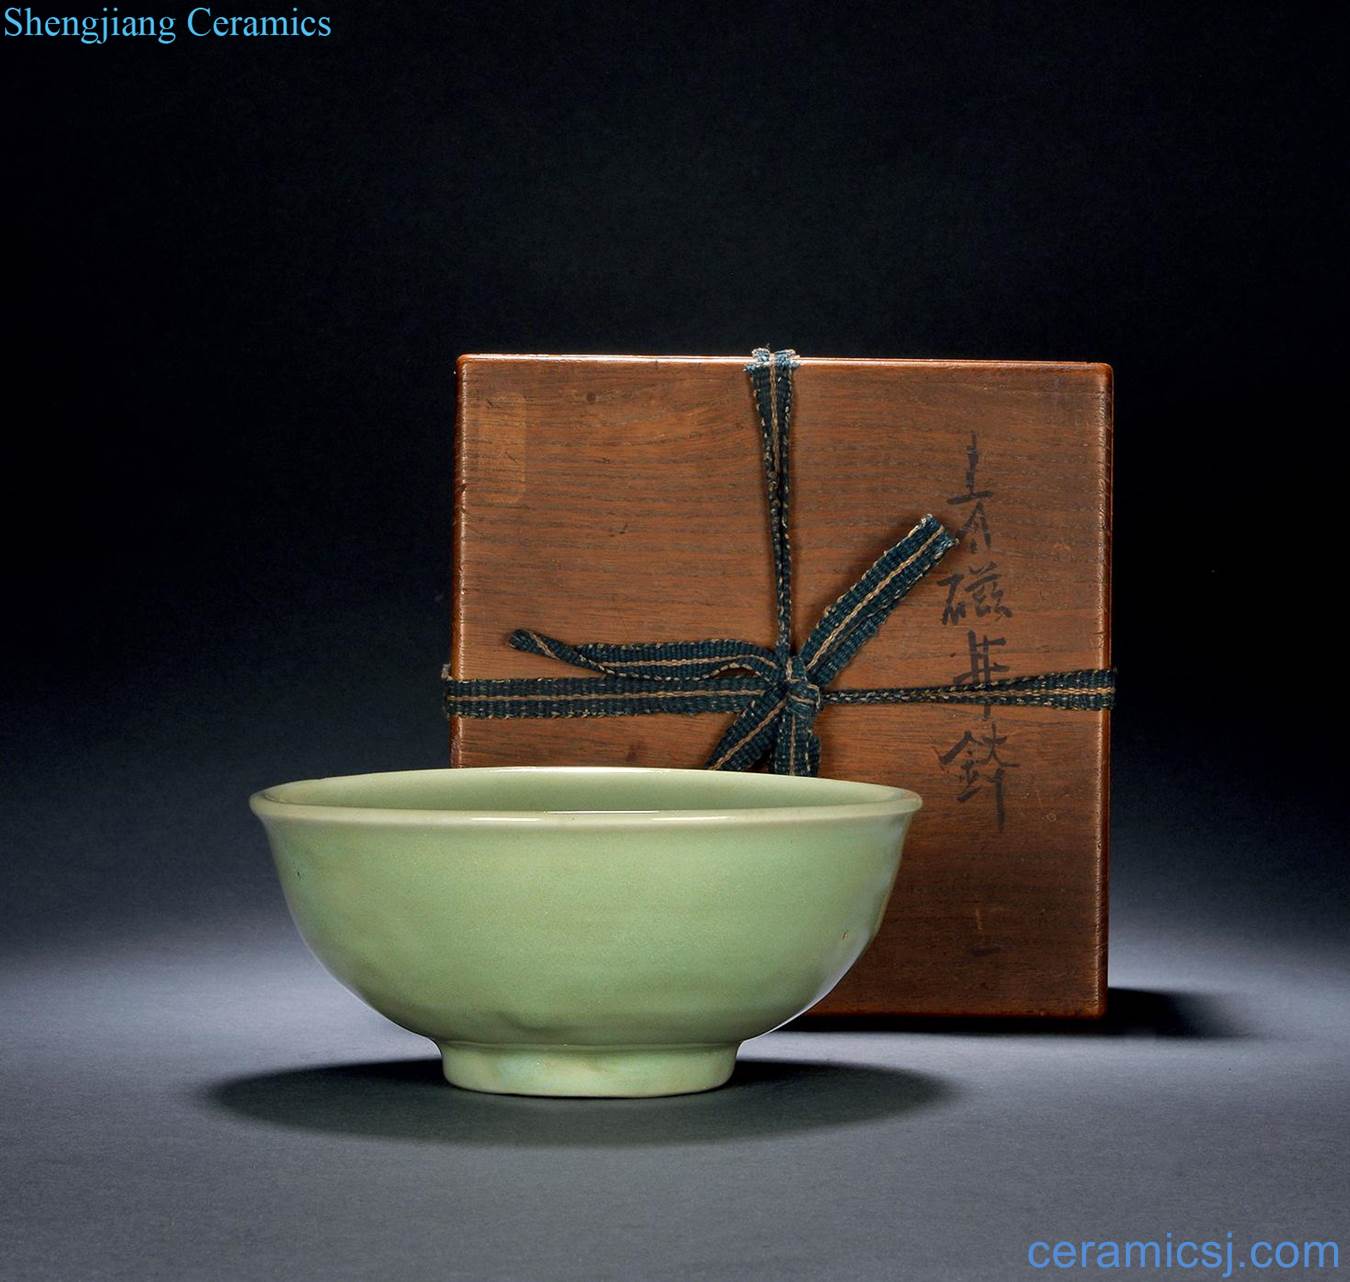 Longquan celadon bowls in early Ming dynasty